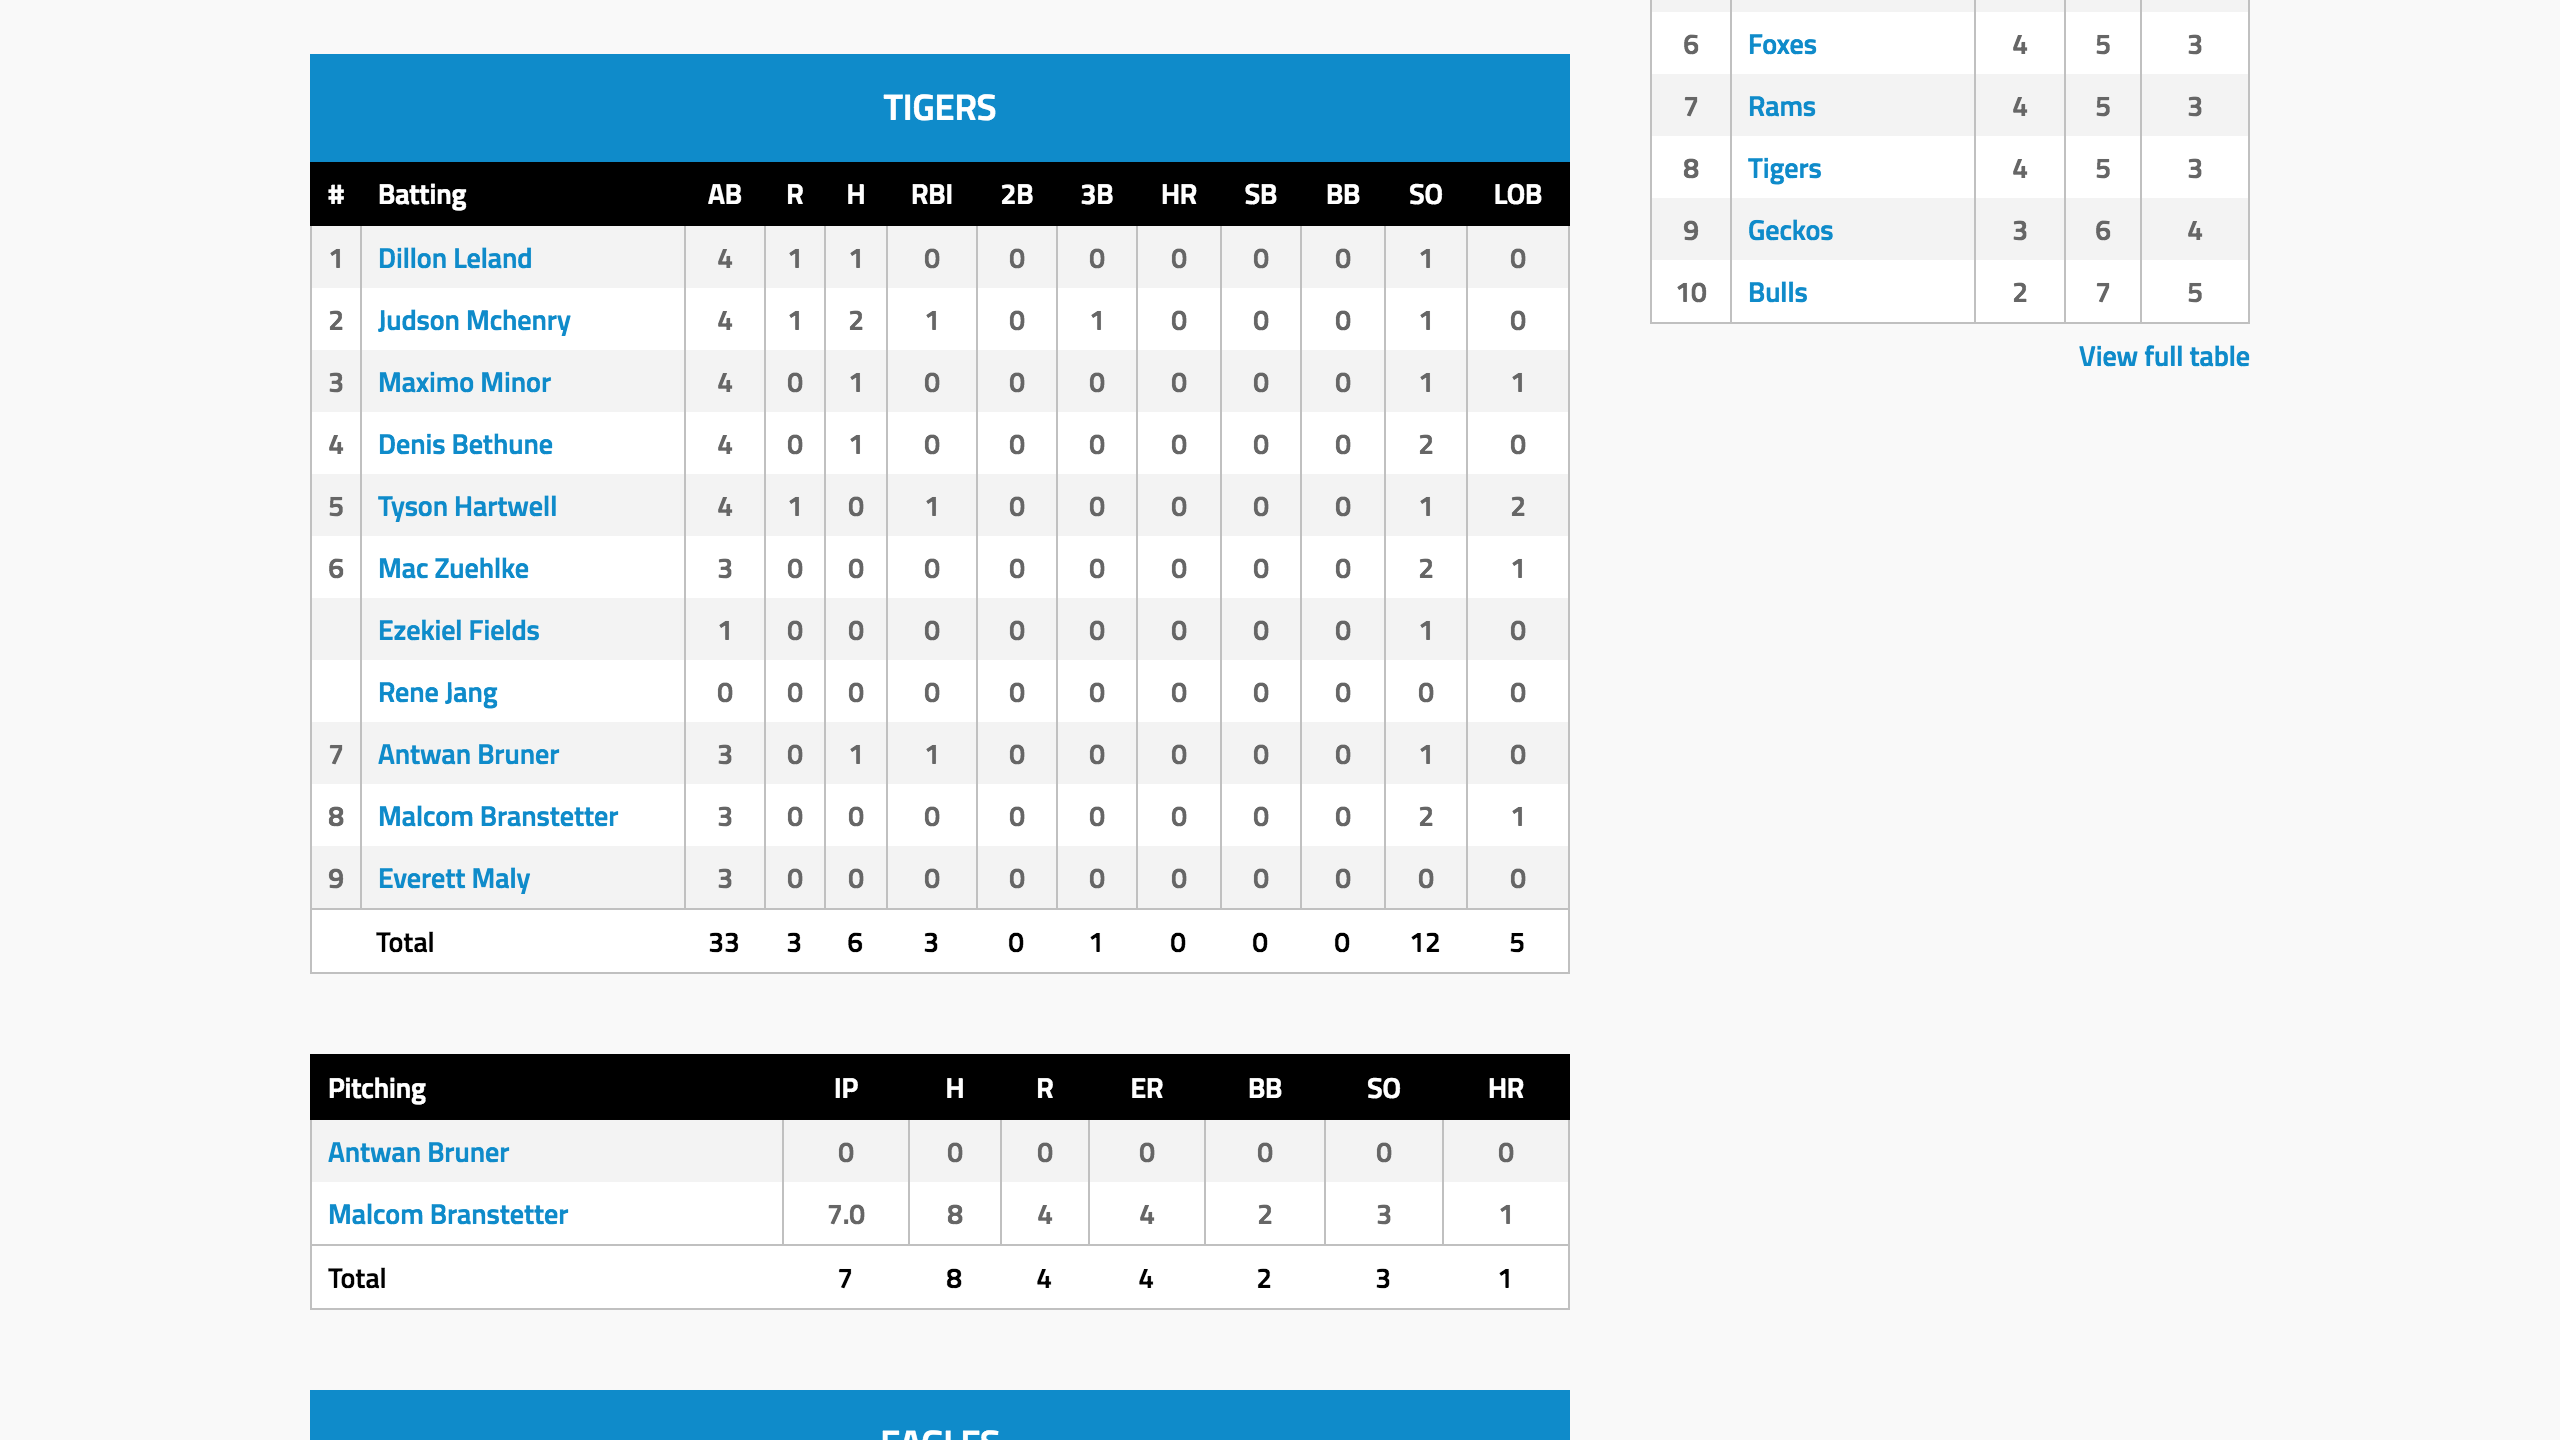 Box score with separate batting and pitching statistics.